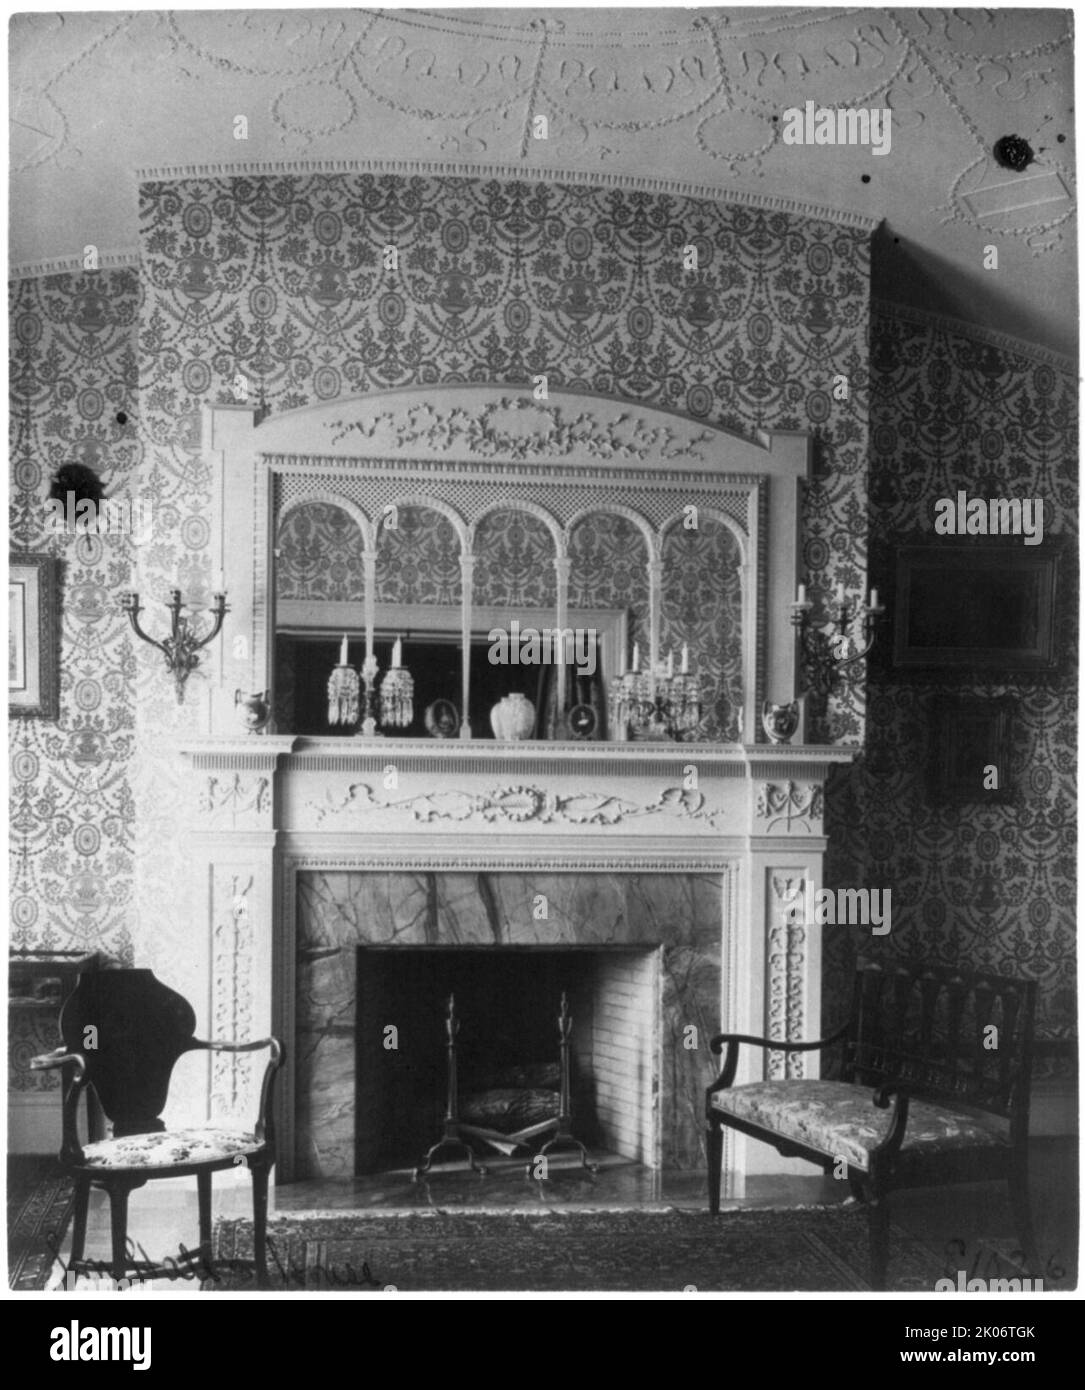 Ornate interiors of Chandler Hale house, 1001 16th St., N.W., Washington, D.C., showing piano, fireplaces, and china closet, c1900. Stock Photo